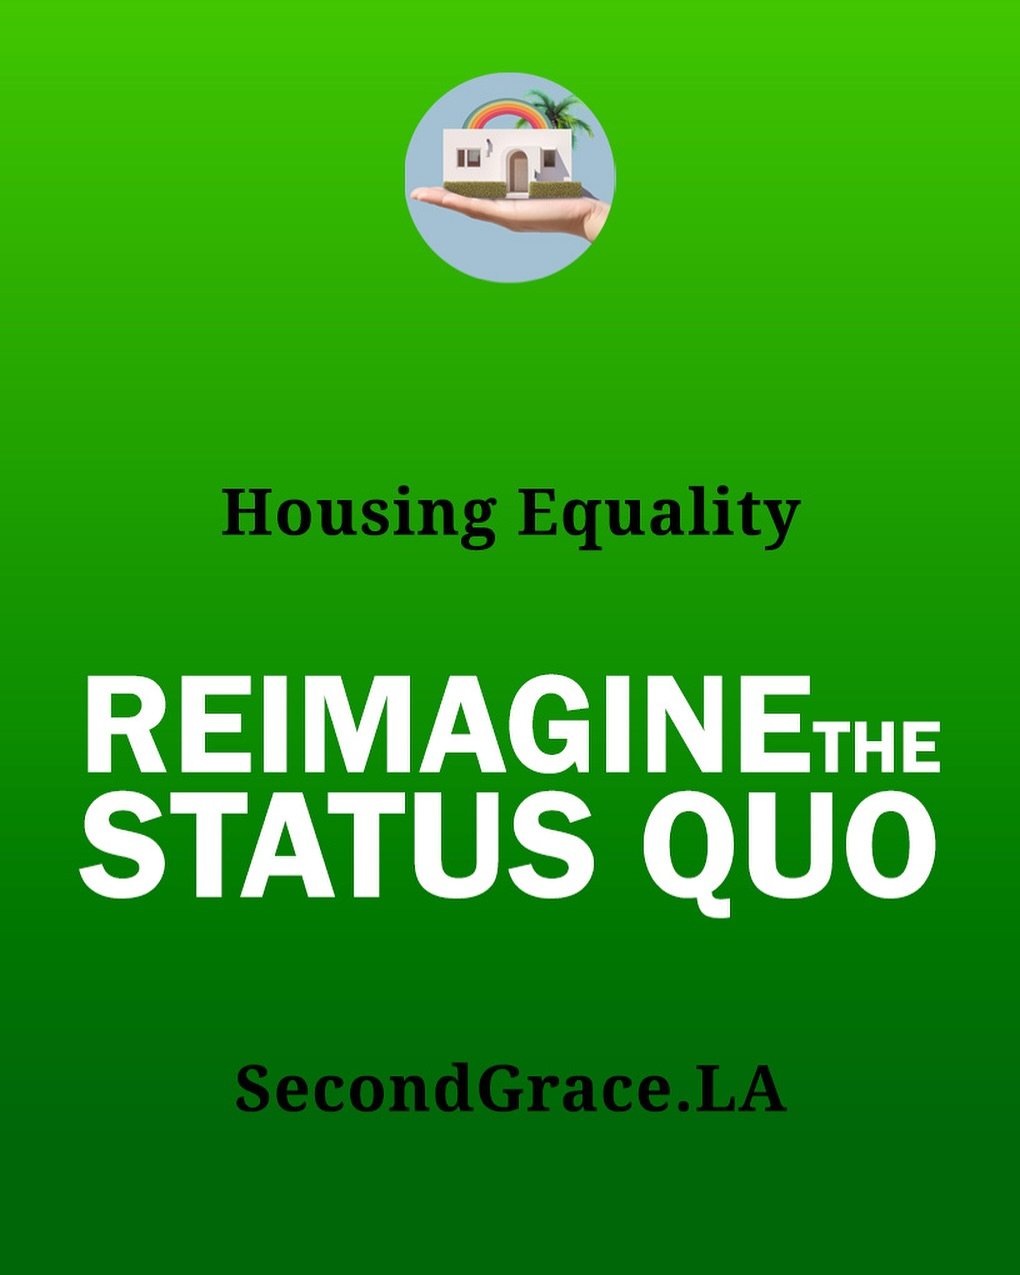 Our unhoused neighbors have hopes, abilities and courage, even amidst challenges. Let&rsquo;s focus on their dignity and potential. Join us @secondgrace.la #FocusOnPotential #EndHomelessness 

Let&rsquo;s end homelessness together, now and for good. 